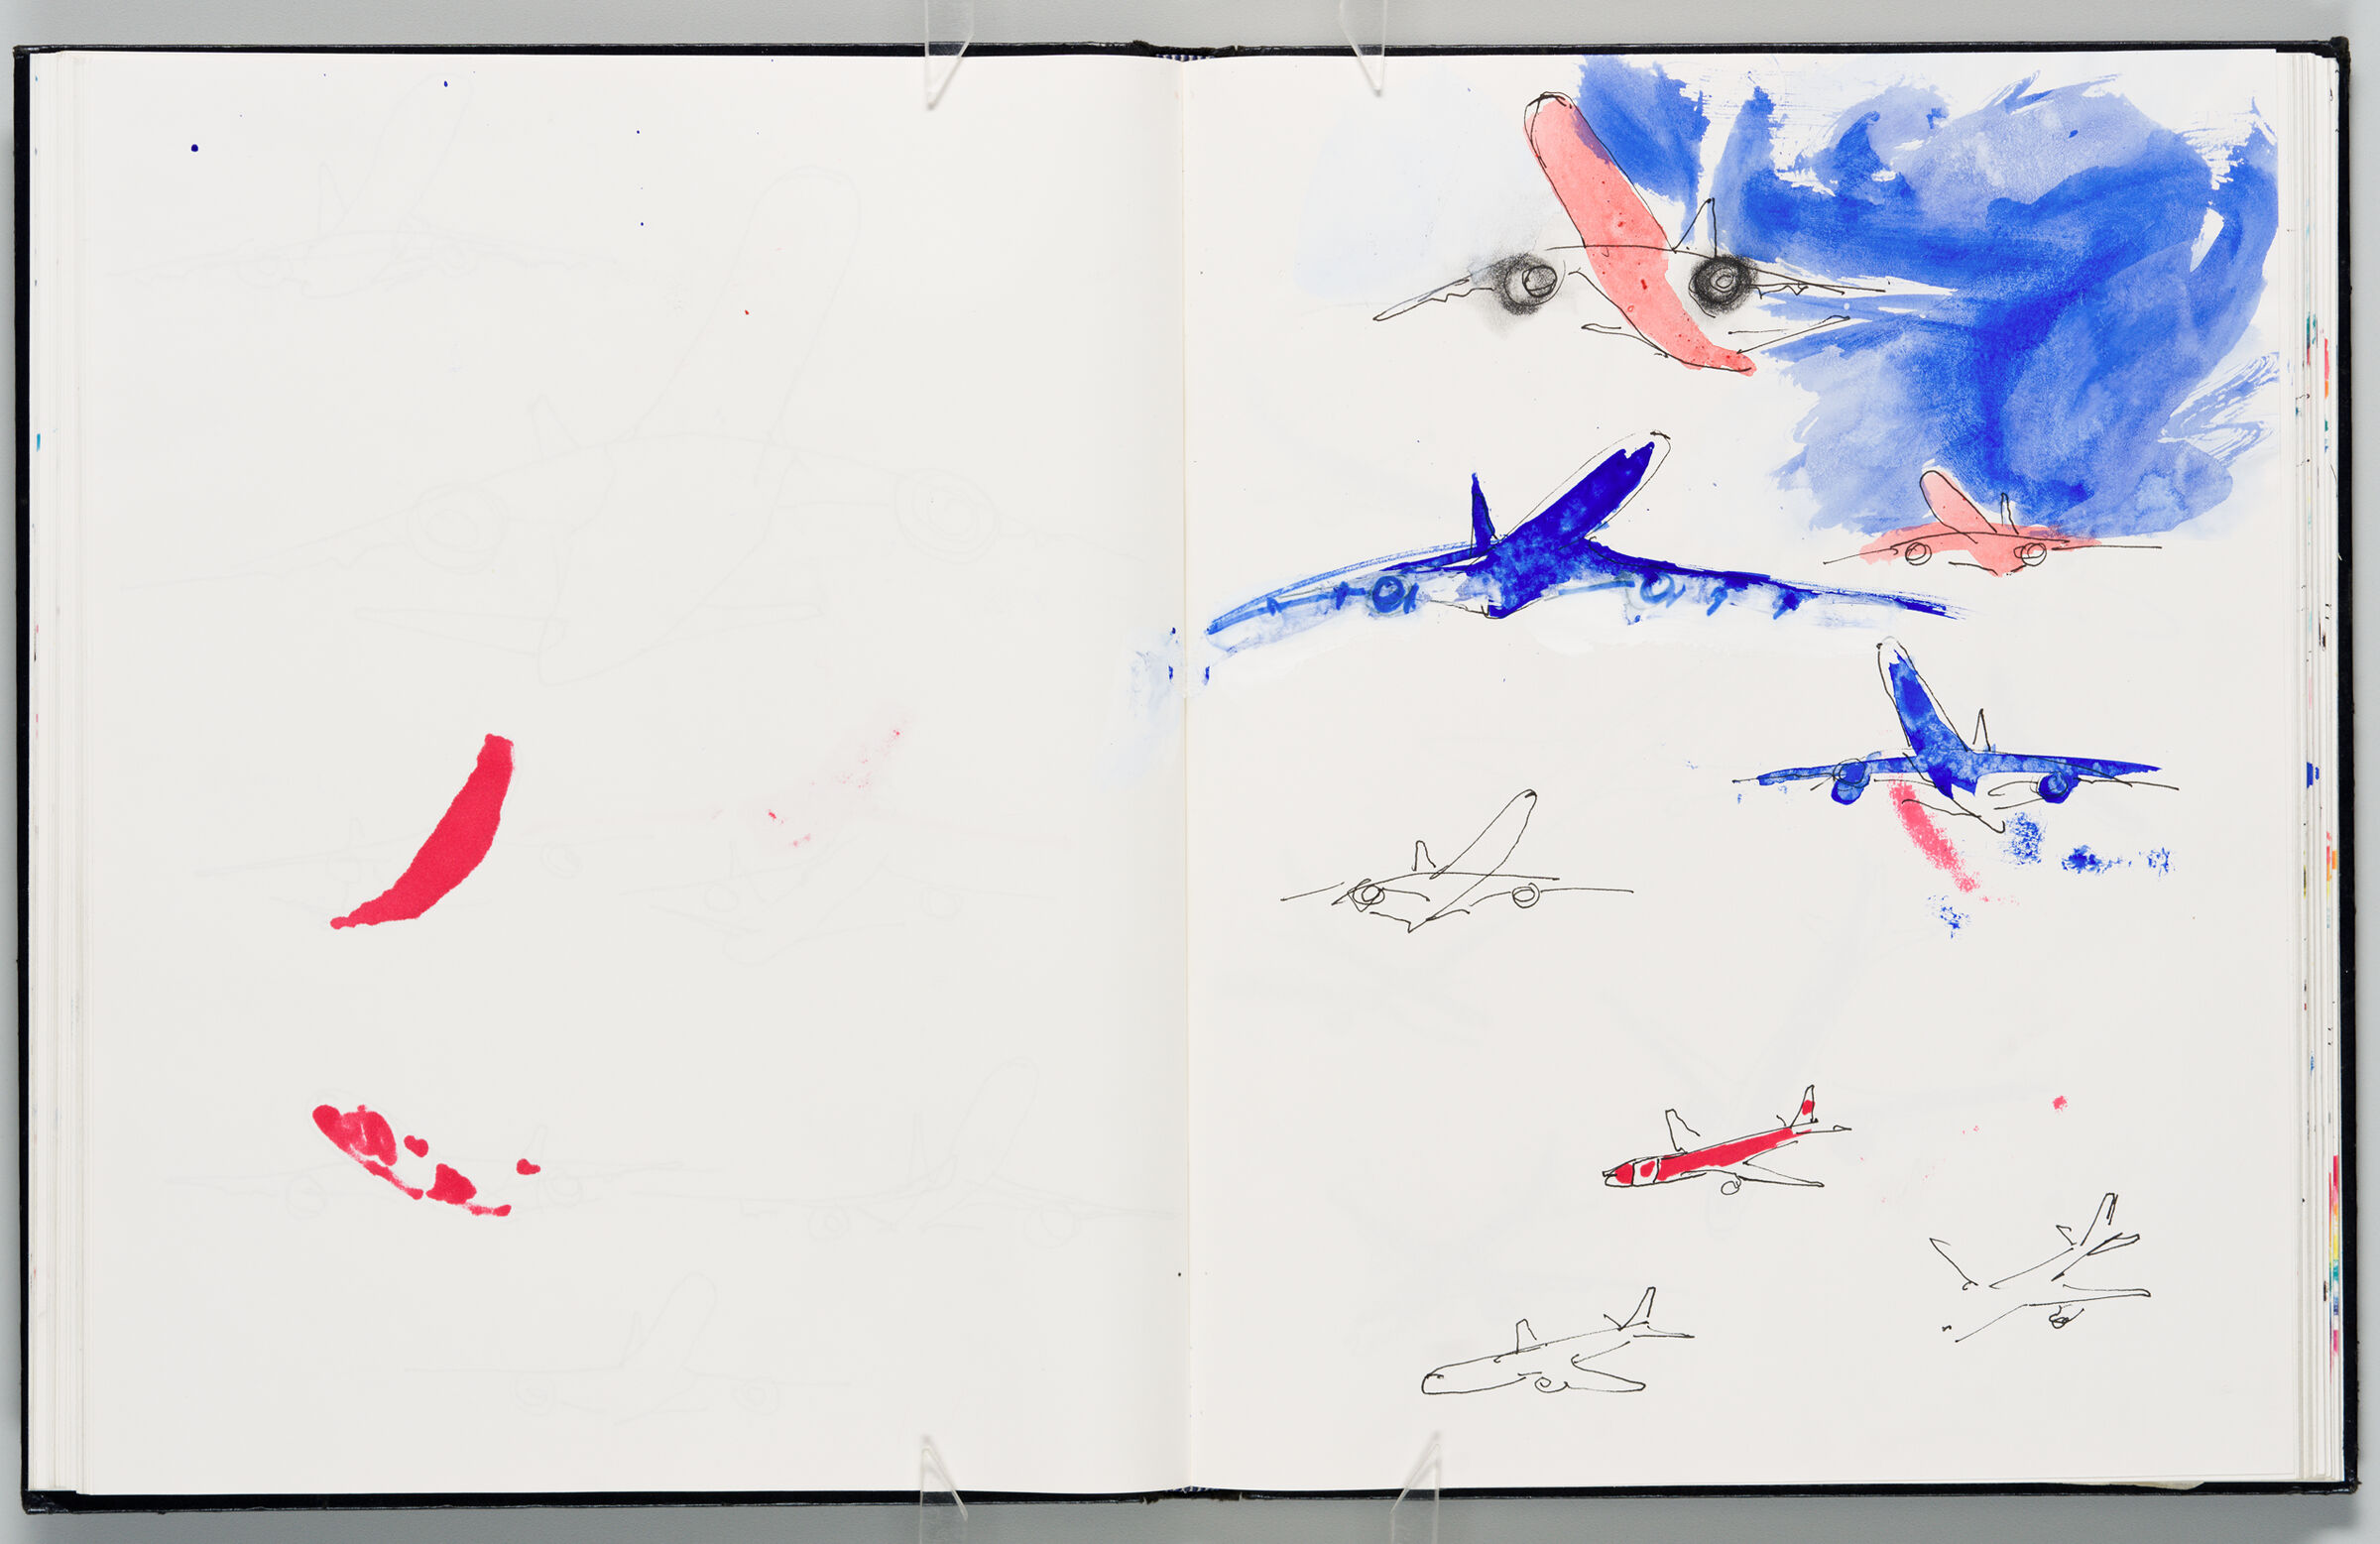 Untitled (Bleed-Through From Previous Page, Left Page); Untitled (Designs For Condor Planes With Color Transfer, Right Page)